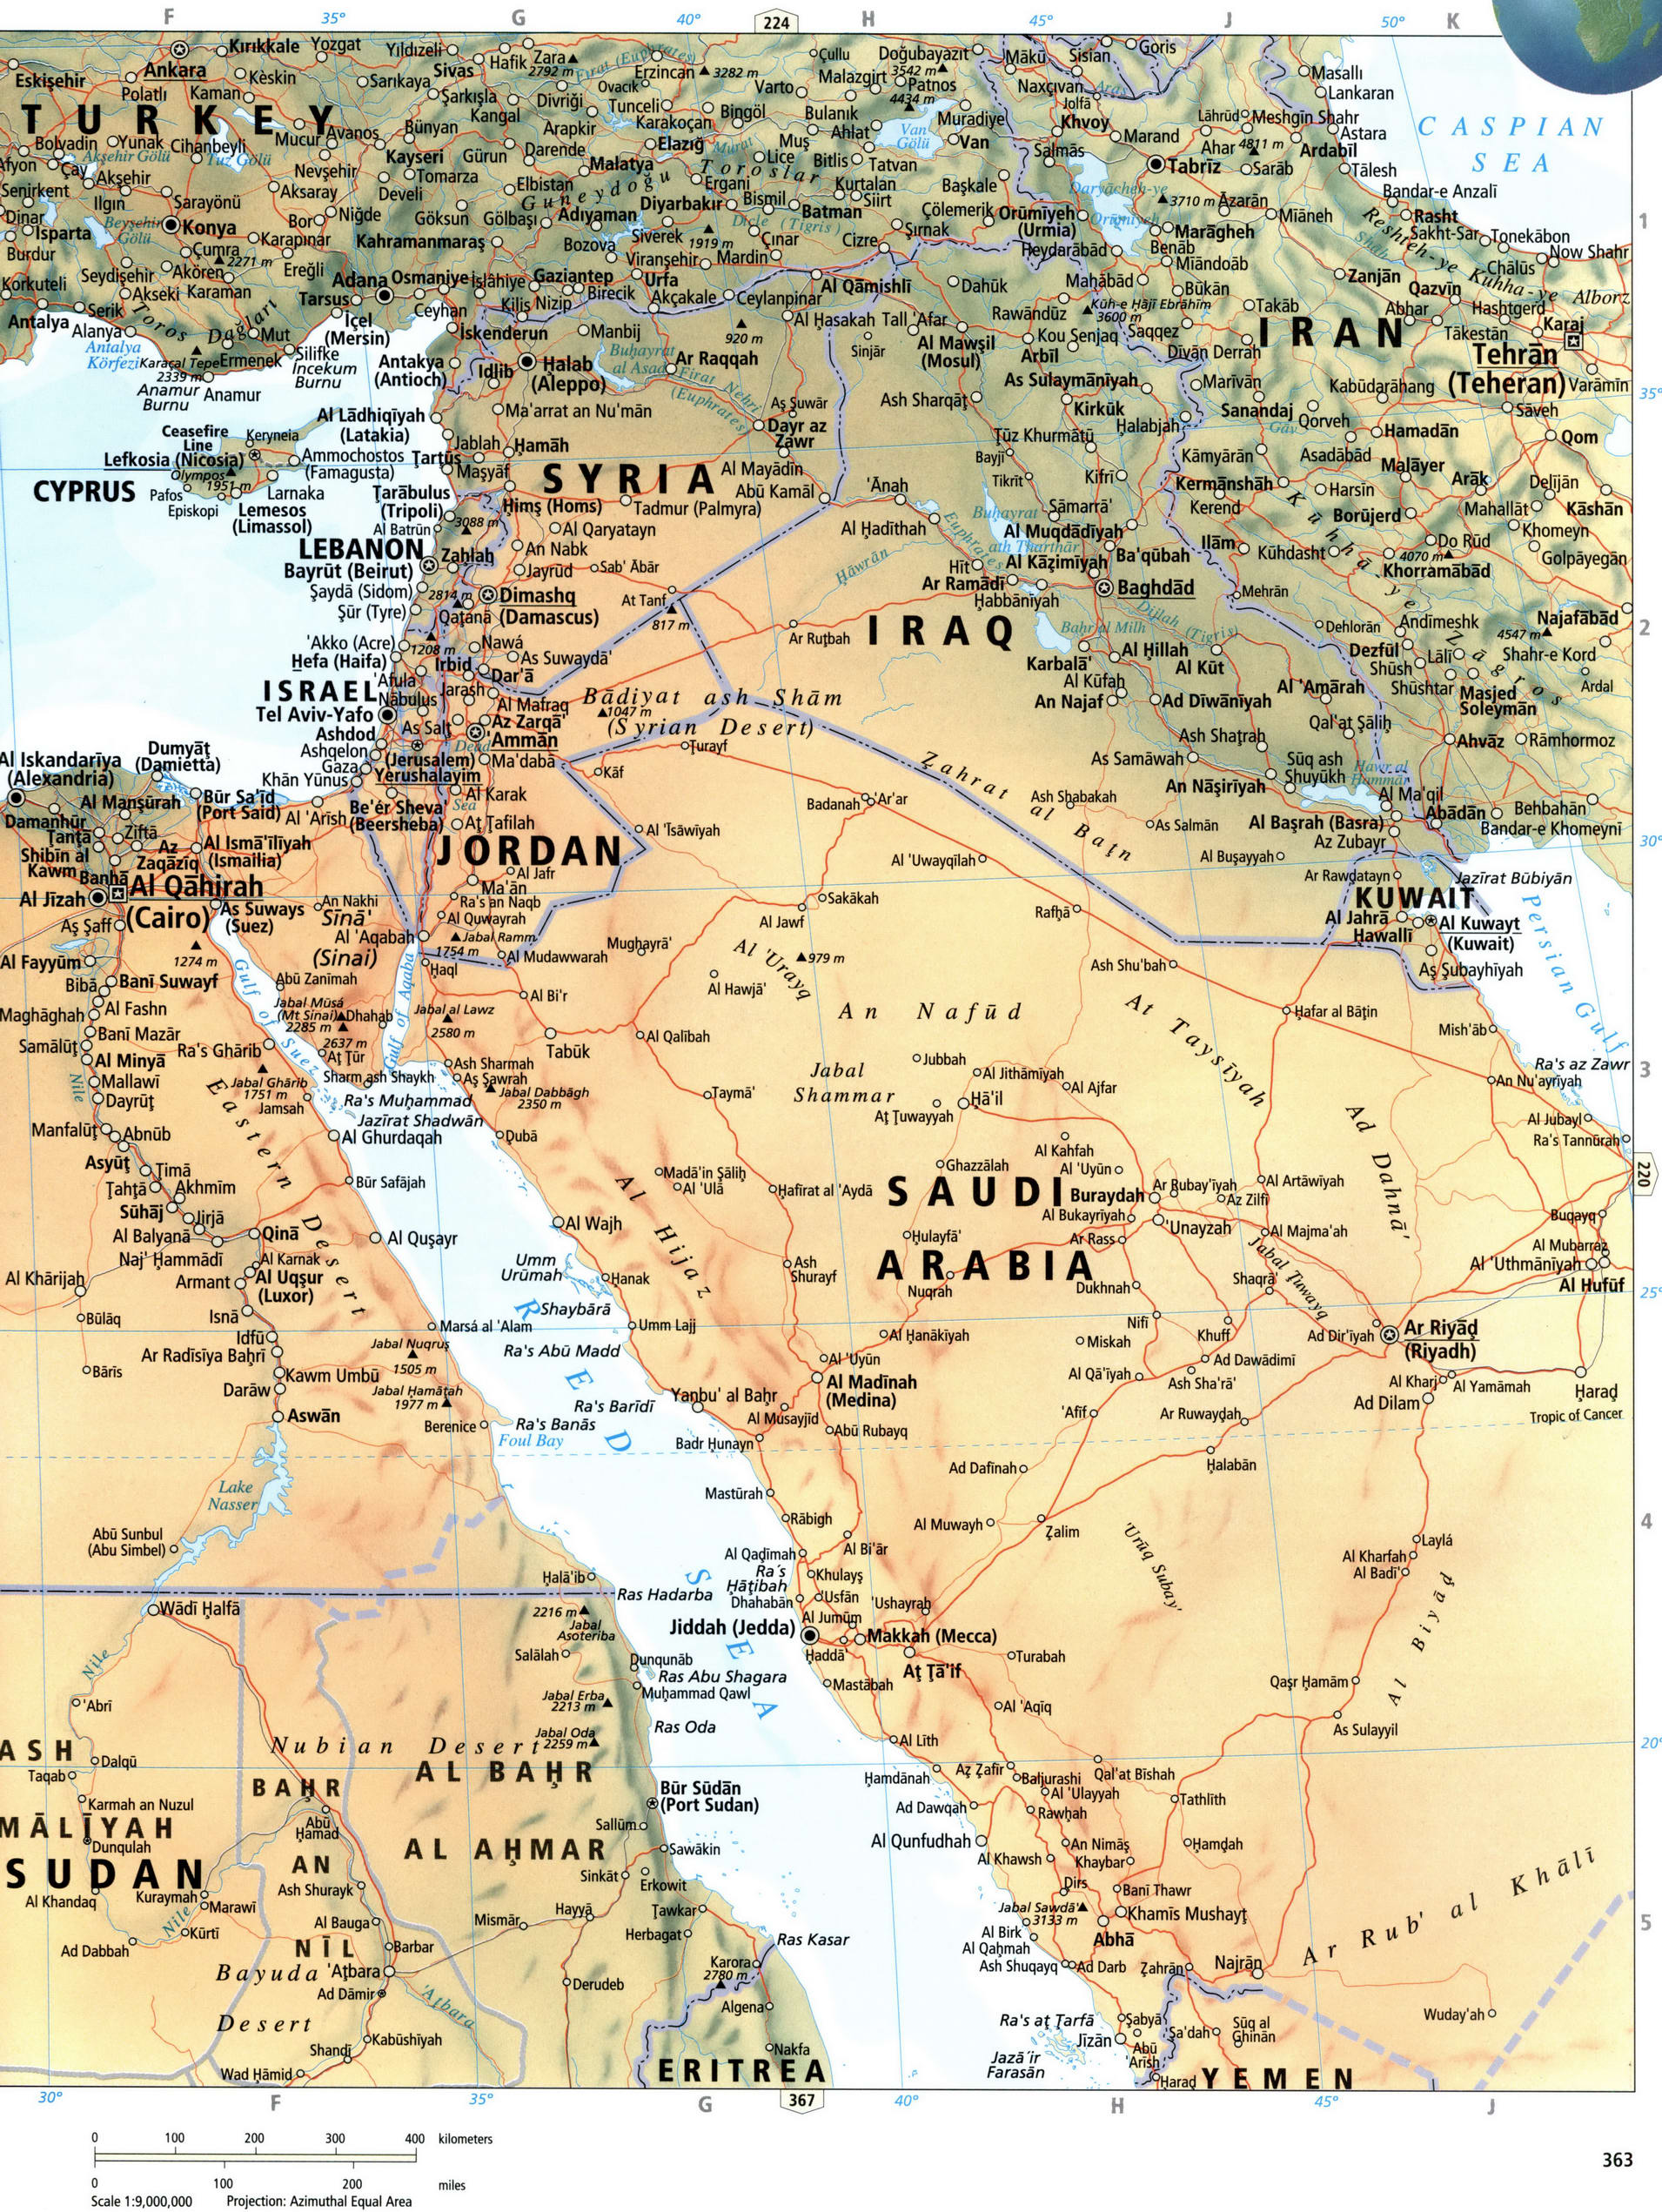 Egypt and North Sudan map